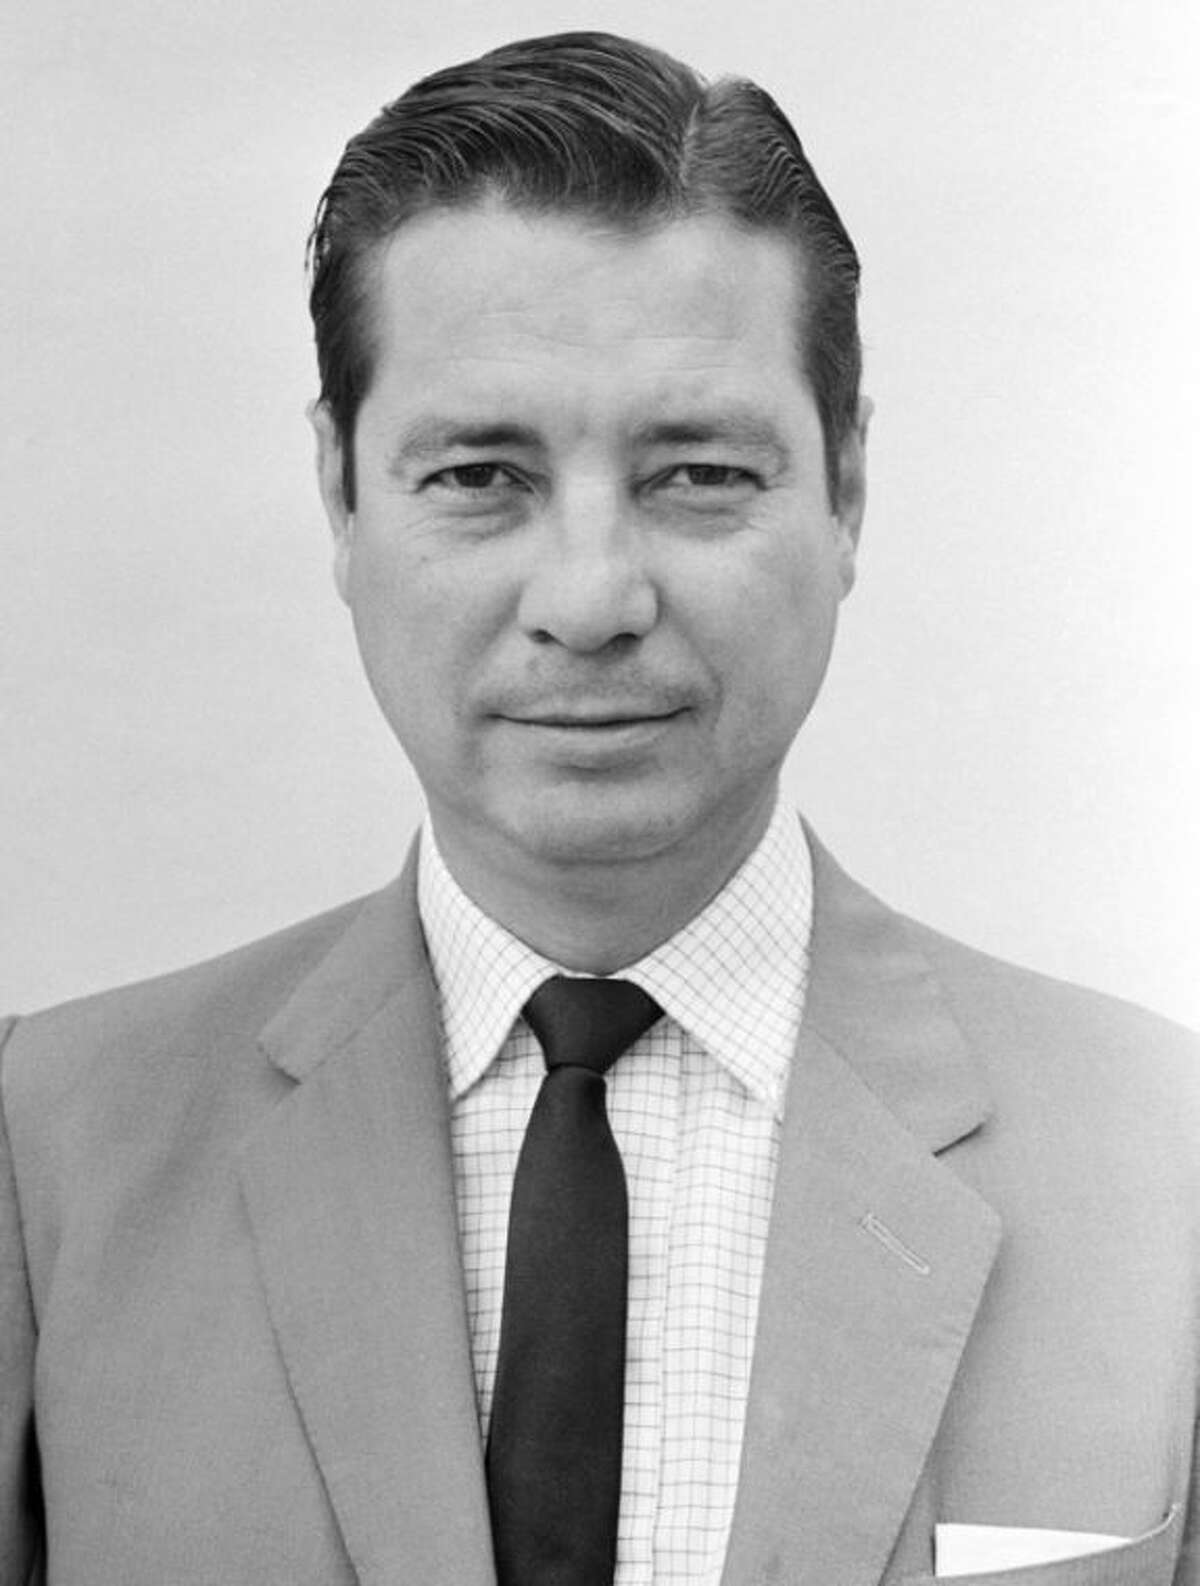 FILE - This 1963 file photo shows George McArthur, Chief of Bureau in Cairo for The Associated Press. McArthur, a former AP foreign correspondent who reported all over the world and spent years in Saigon covering the Vietnam war, has died. He was 88. His wife, Eva Kim McArthur said he died Friday night, April 12, 2013 in a hospice in Fairfax County, Va., of complications from a stroke. (AP Photo)